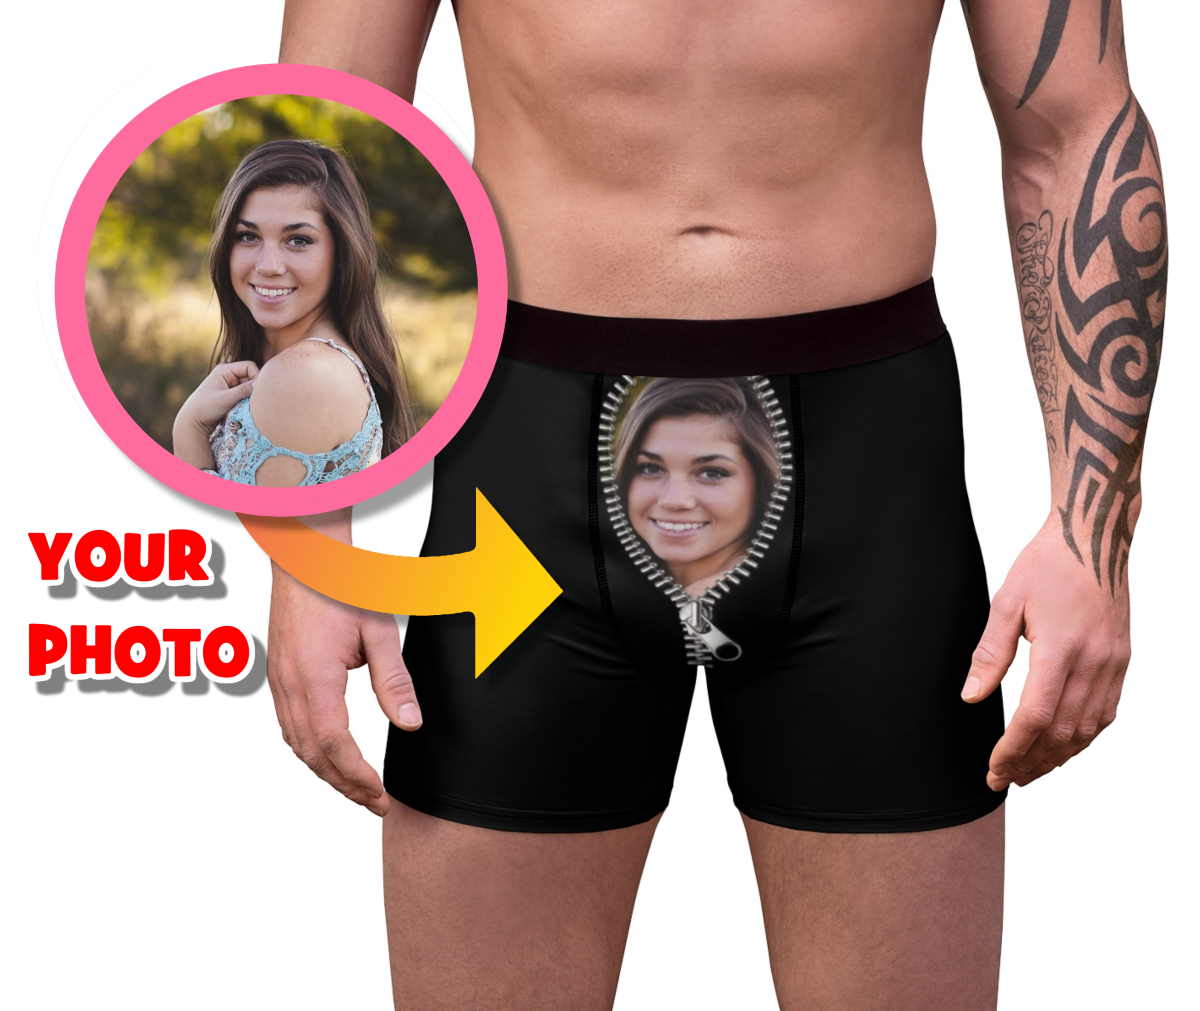 Your Face on Custom Men's Boxers with Zipper - Personalized Underwear